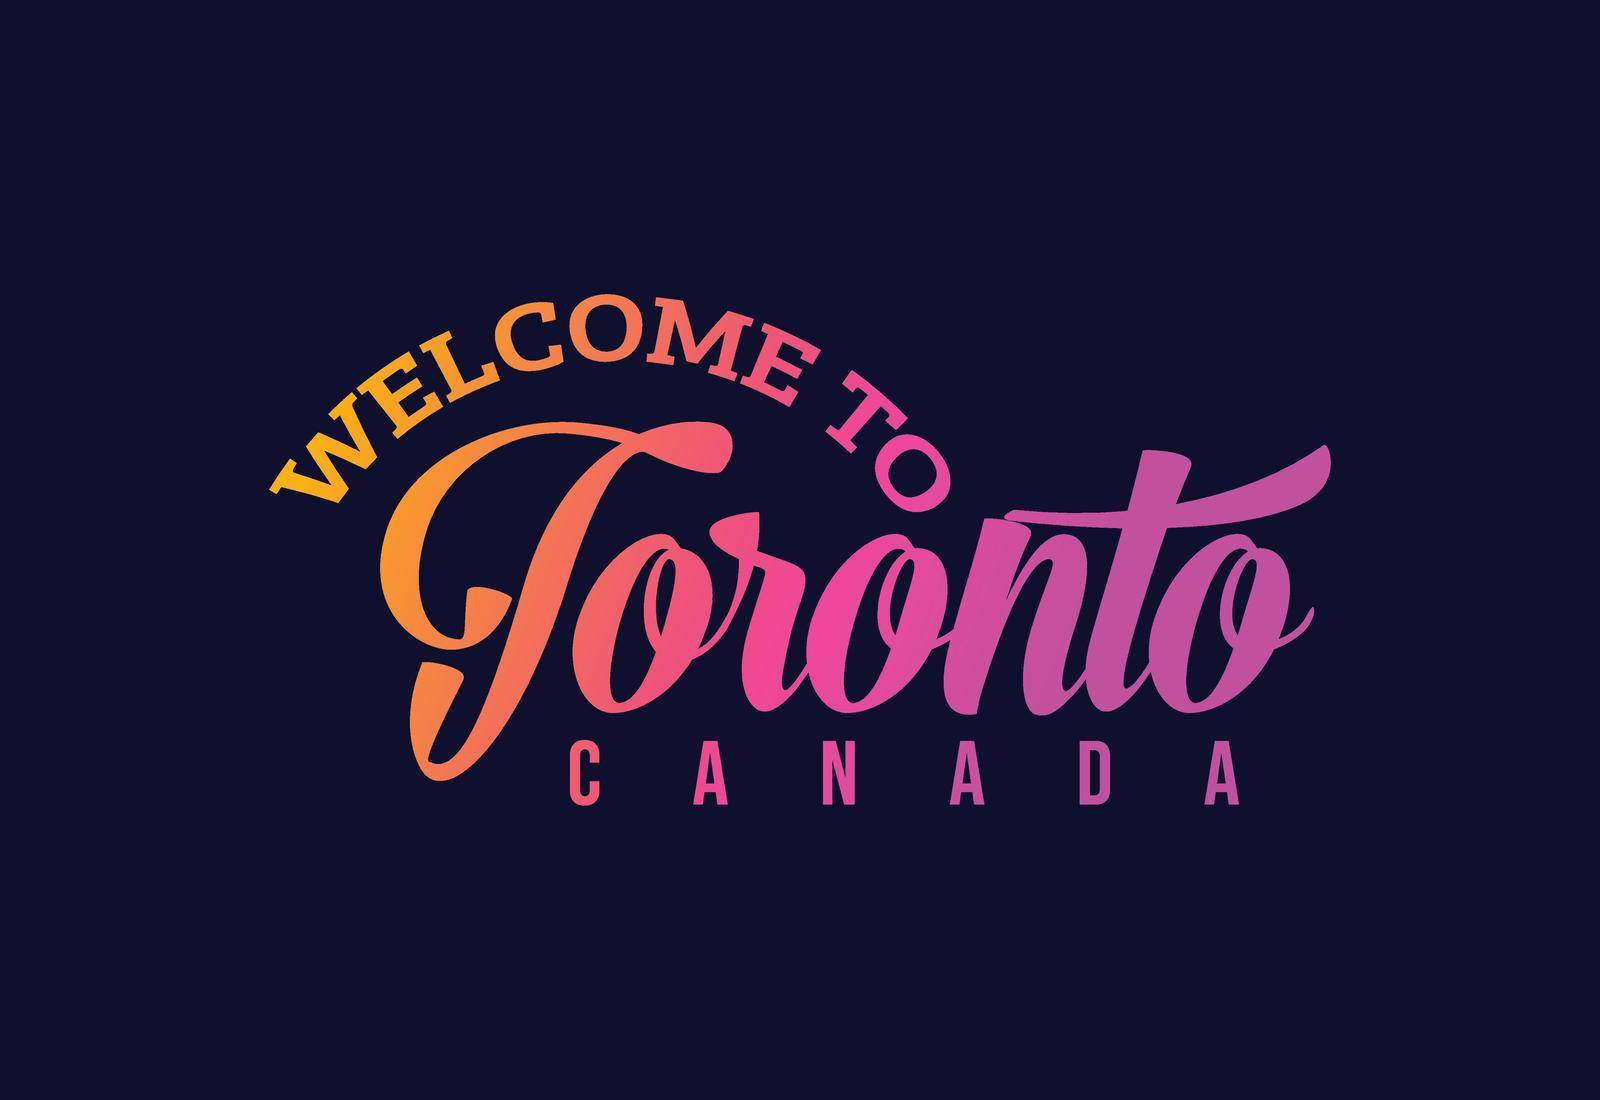 Welcome To Toronto. Canada Word Text Creative Font Design Illustration. Welcome sign by busrat